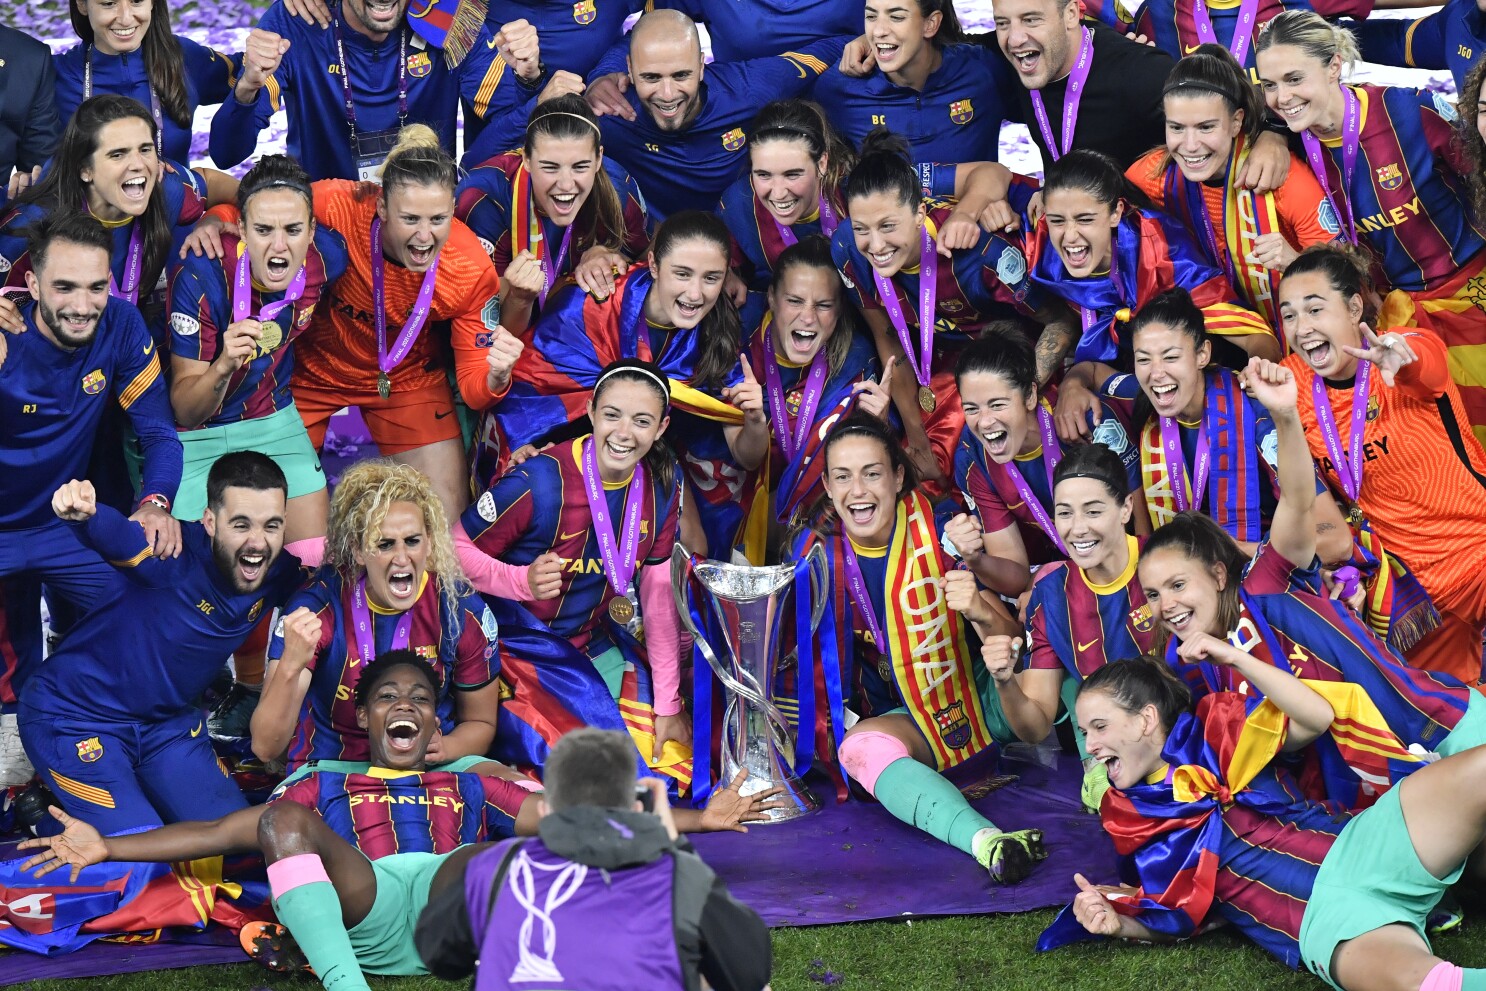 Barcelona Routs Chelsea 4 0 To Win Wcl Final For 1st Time The San Diego Union Tribune